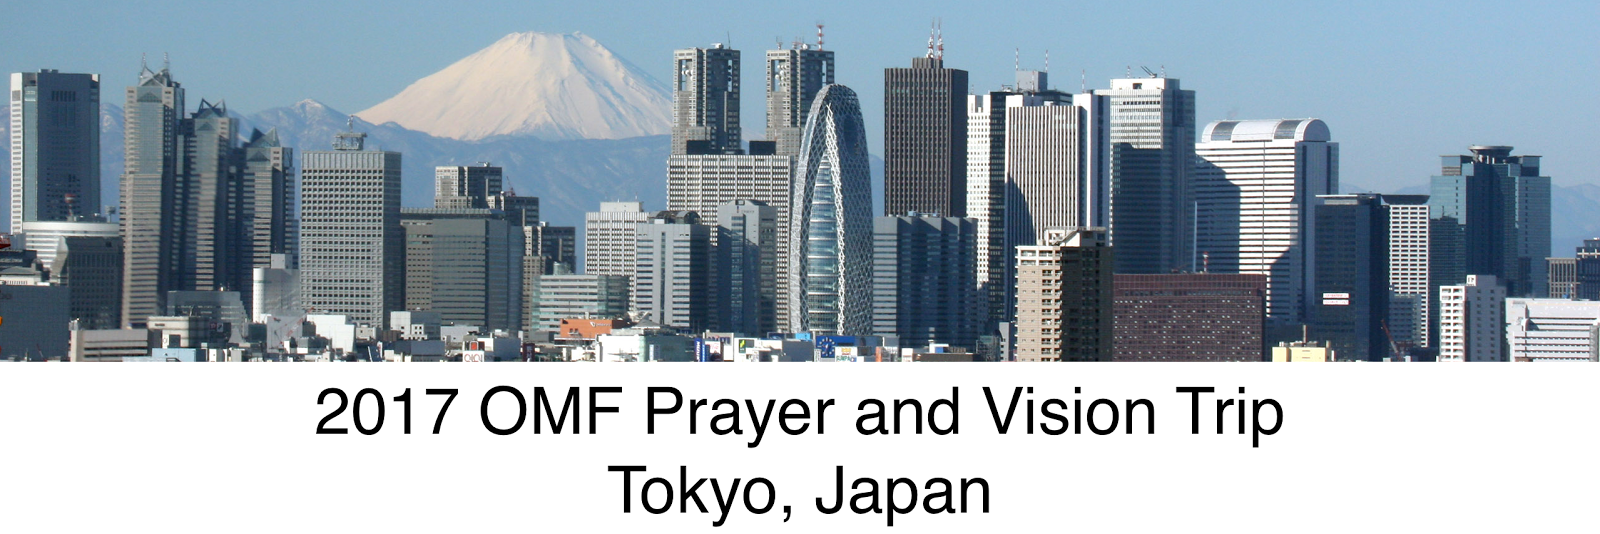 2017 OMF Prayer and Vision Trip to Tokyo, Japan